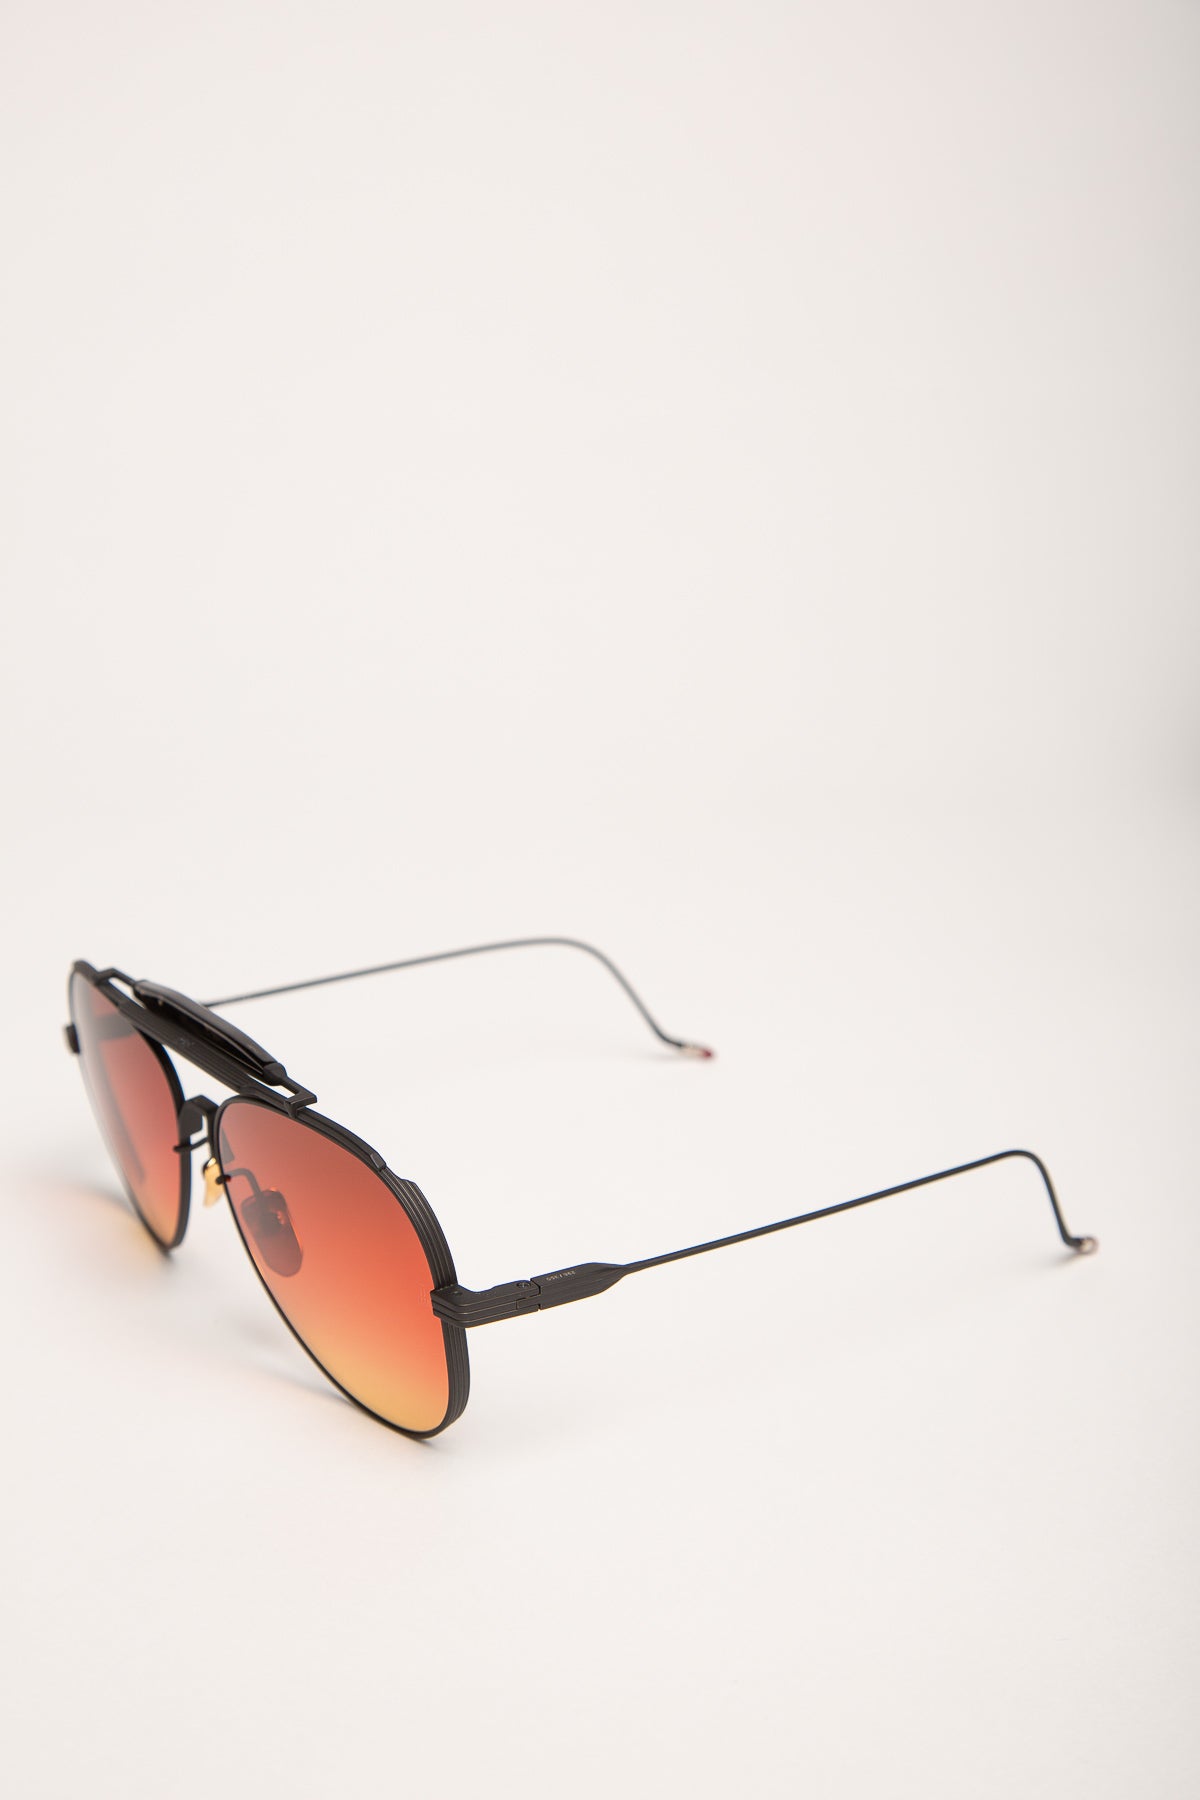 JACQUES MARIE MAGE | GONZO PEYOTE 2 SUNGLASSES